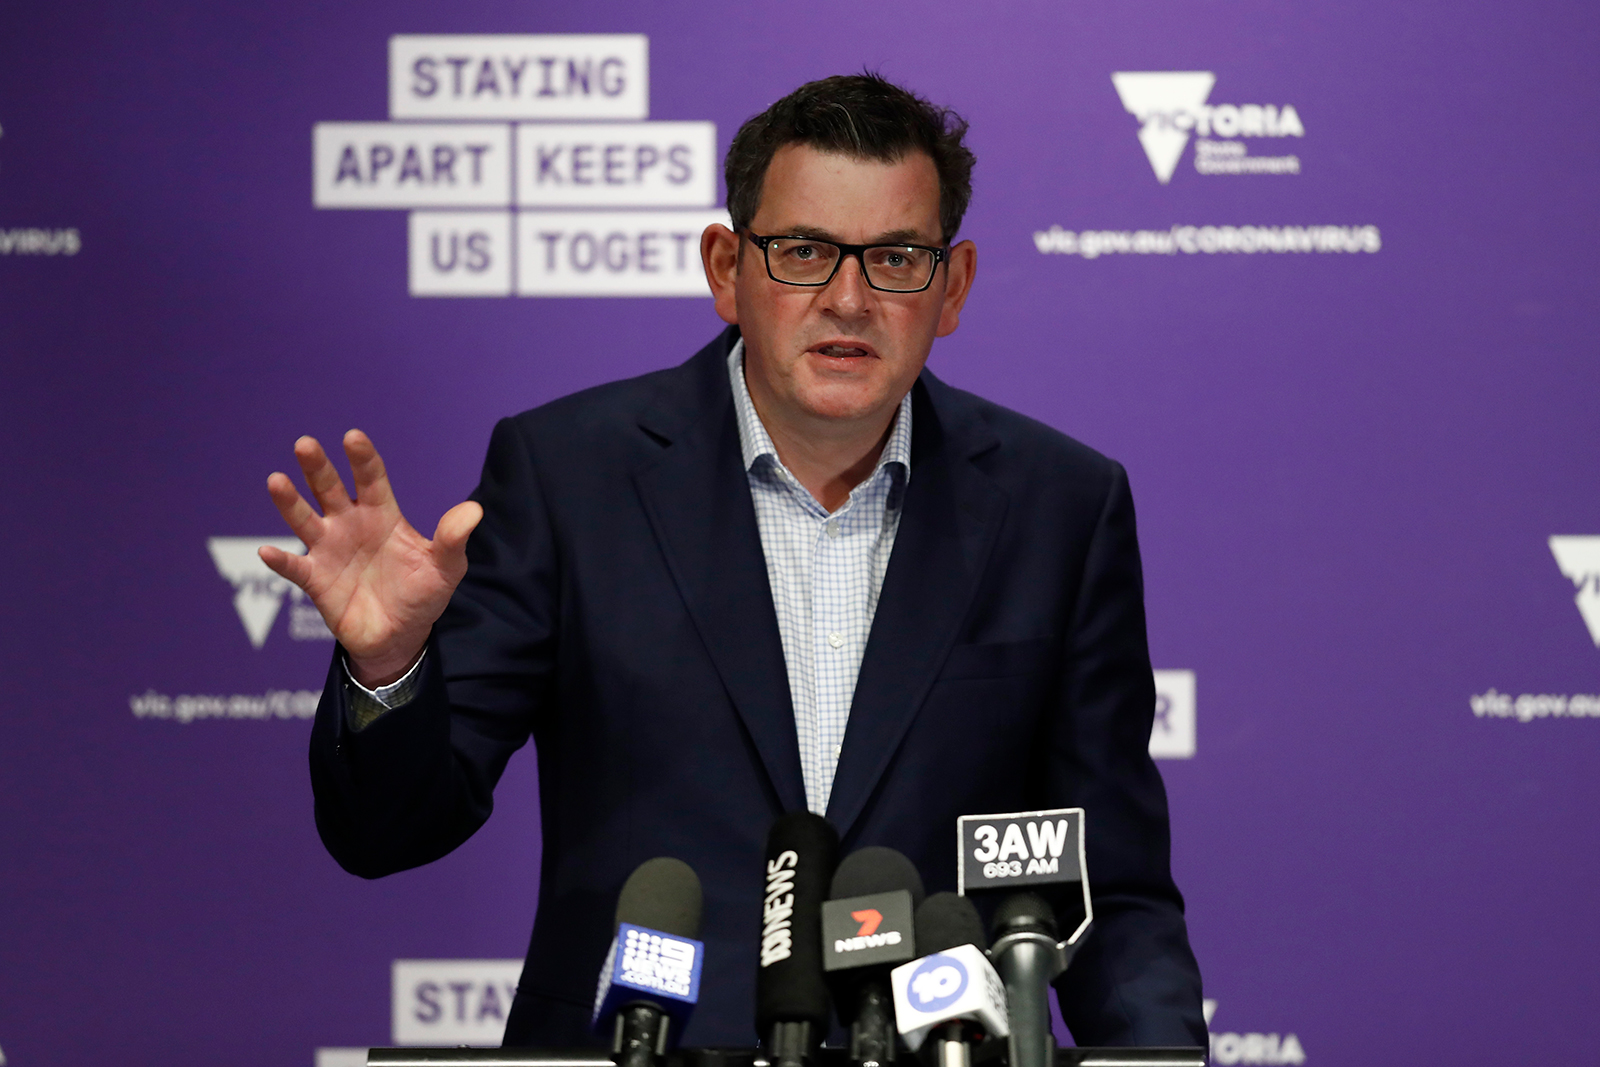 Victorian Premier Daniel Andrews speaks to the media during a news conference in Melbourne, Australia on Sunday, August 2.